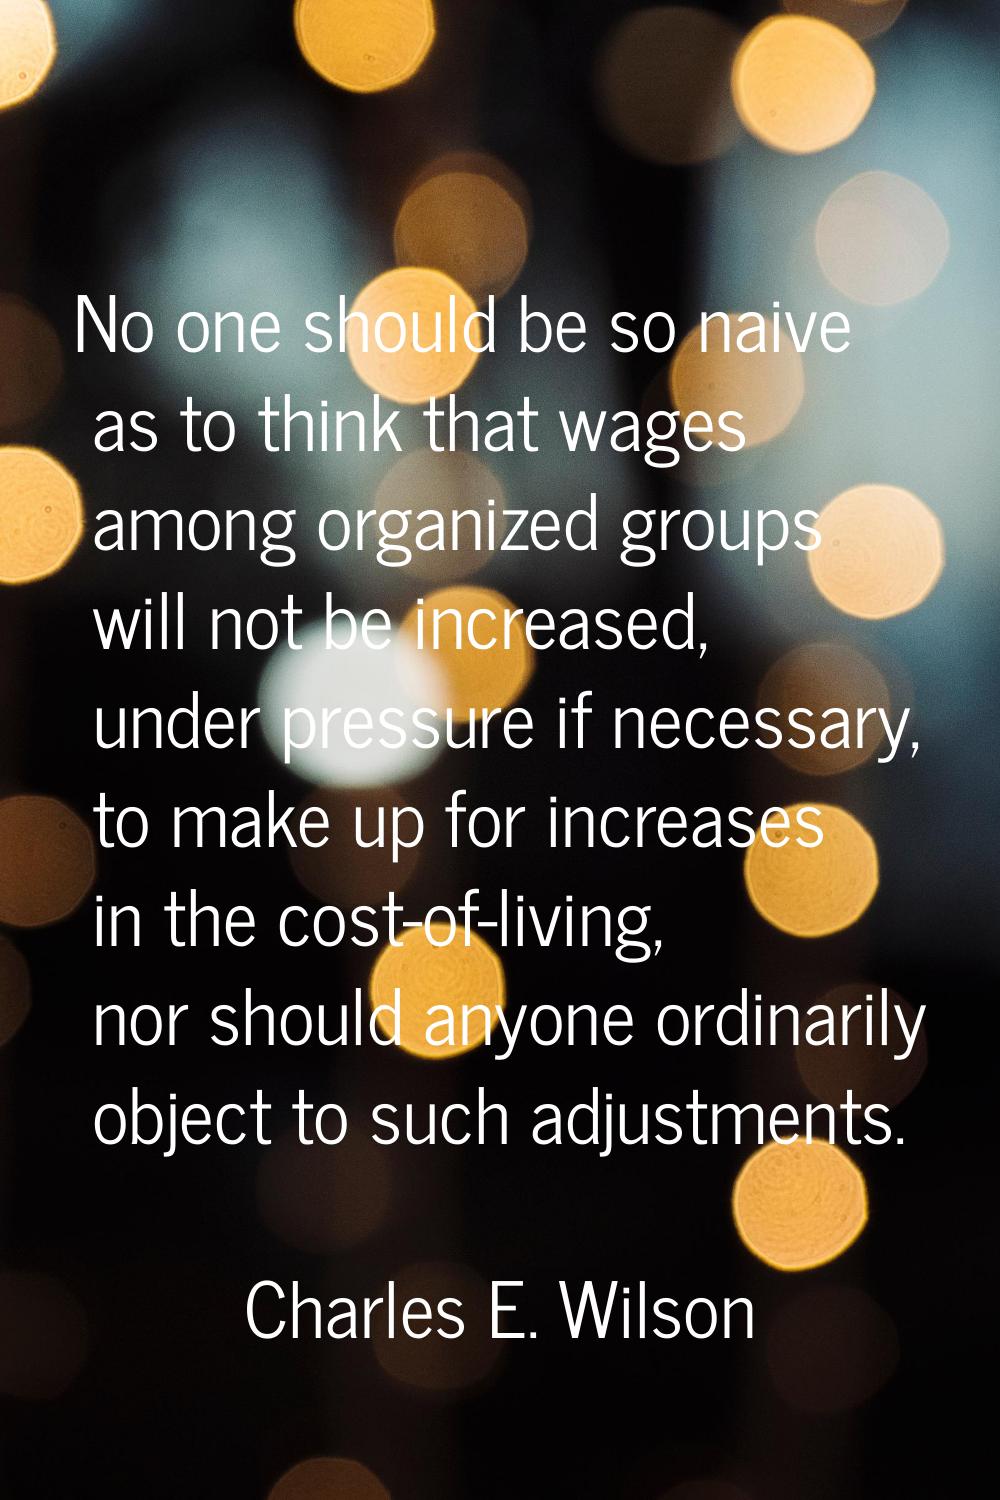 No one should be so naive as to think that wages among organized groups will not be increased, unde